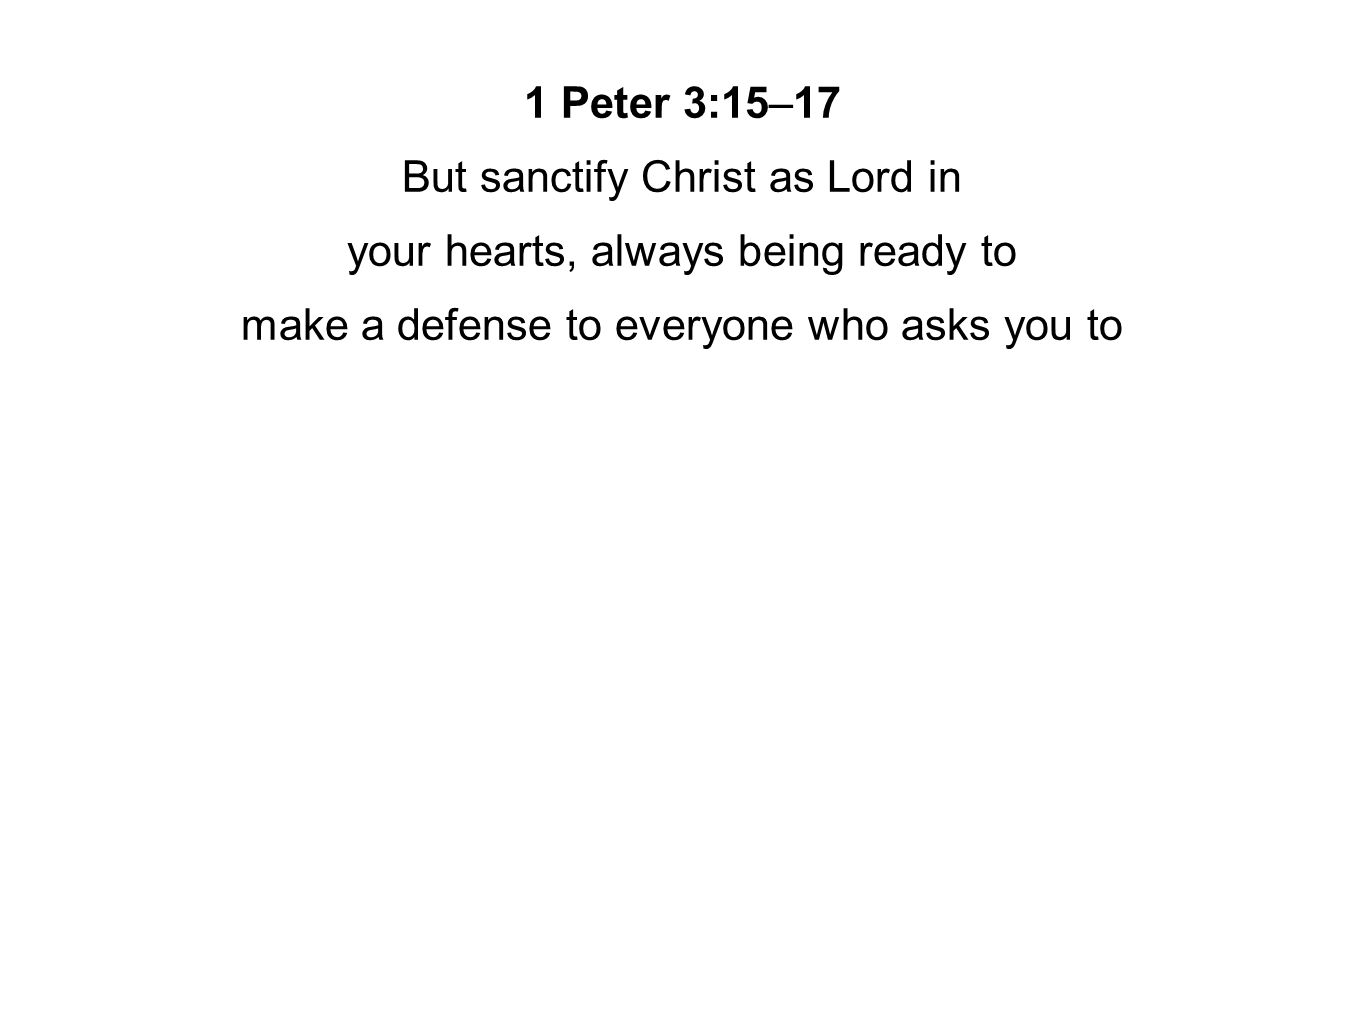 1 Peter 3:15–17 But sanctify Christ as Lord in your hearts, always being ready to make a defense to everyone who asks you to